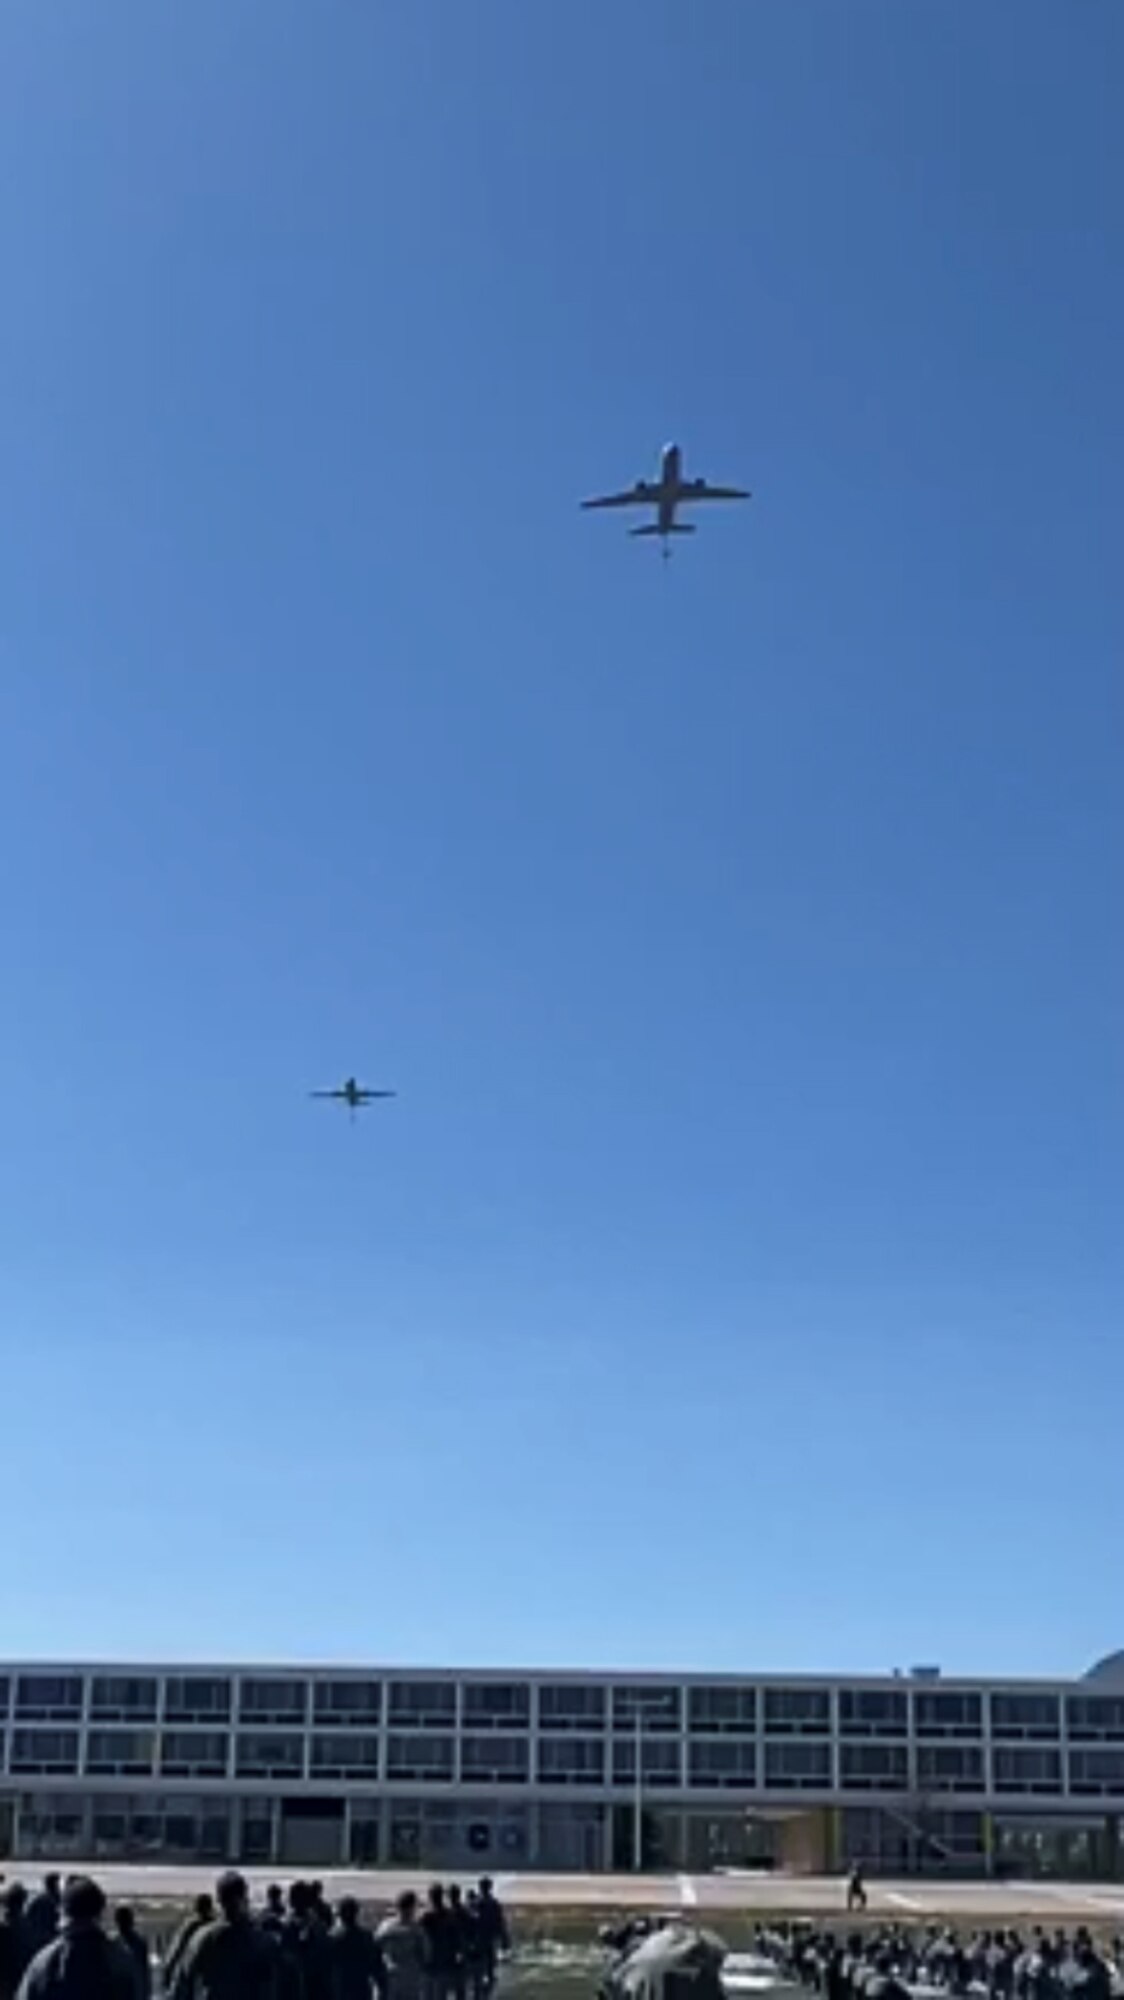 Two KC-46 Pegasus aircraft assigned to the 56th Air Refueling Squadron at Altus Air Force Base, Oklahoma, fly over the United States Air Force Academy in Colorado Springs, Colorado, April 17, 2020.